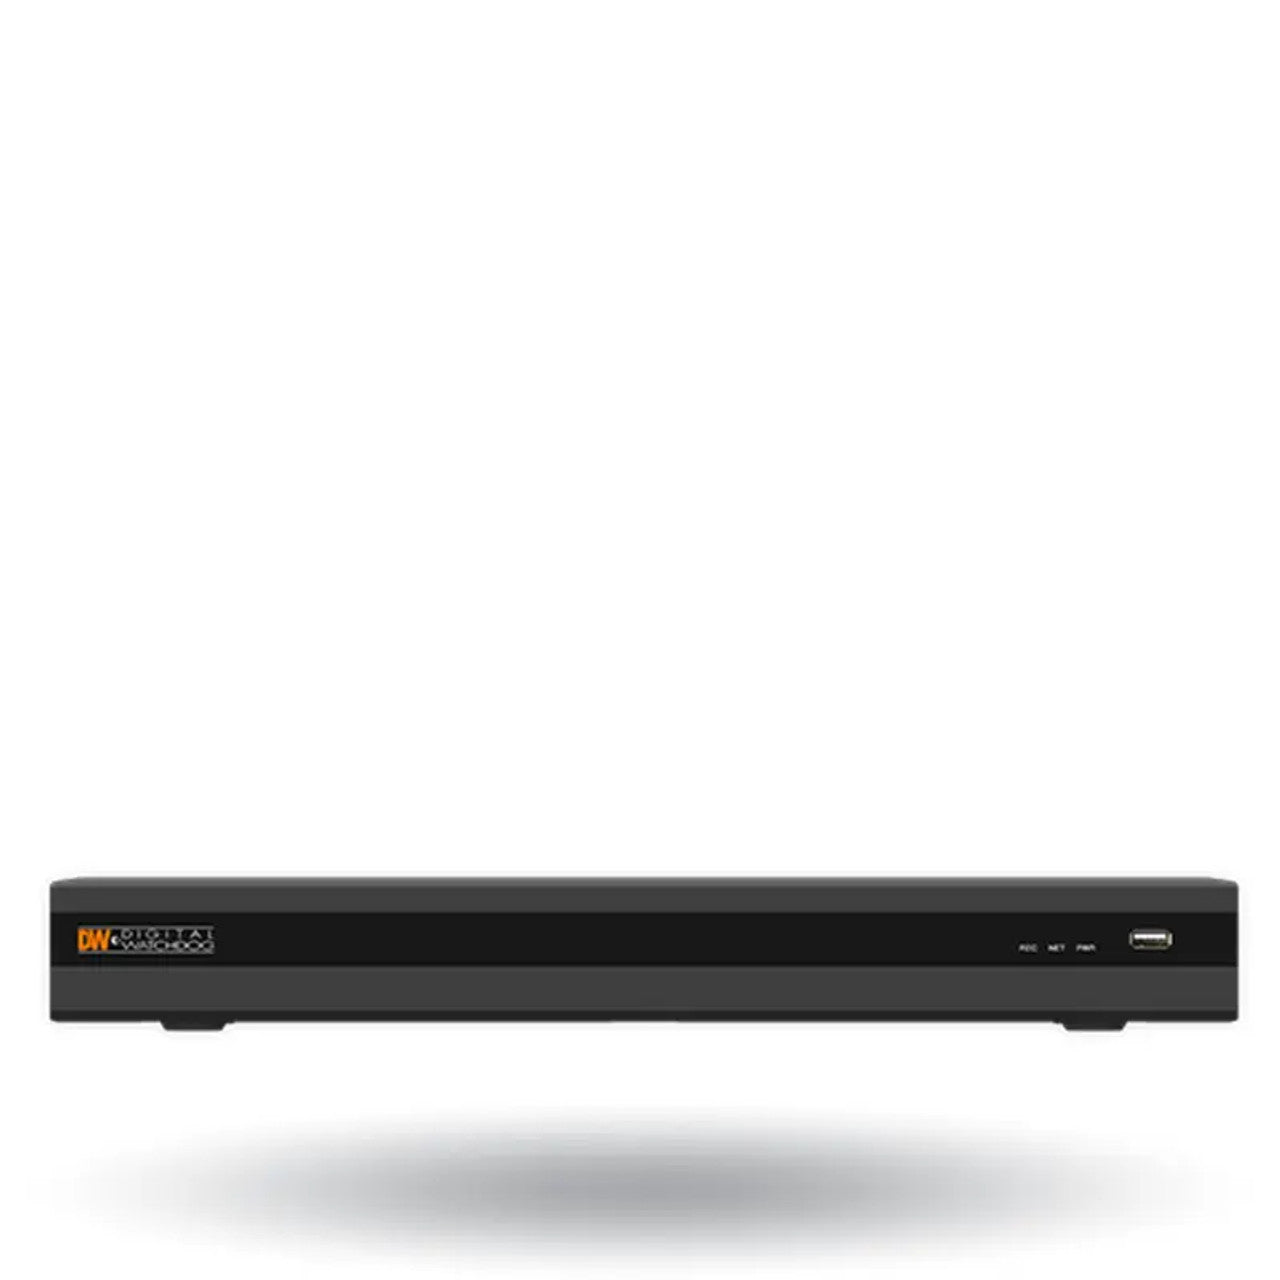 Digital Watchdog DW-VG4126T8P VMAX IP G4 8 Channel PoE NVR with 4 bonus channels with 6TB Hard Drive, 12-Channel